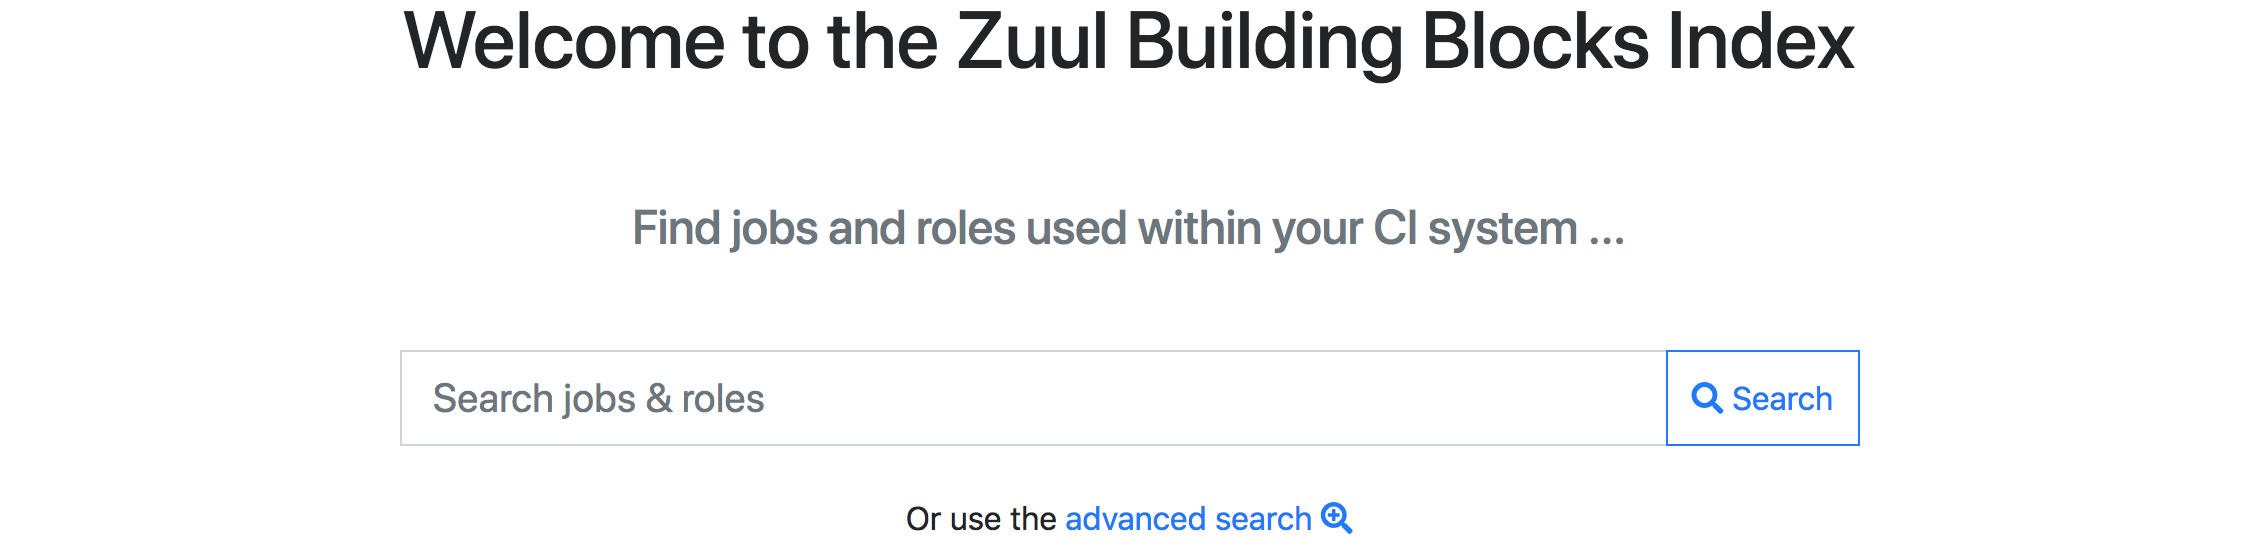 Welcome to the Zuul Building Blocks Index